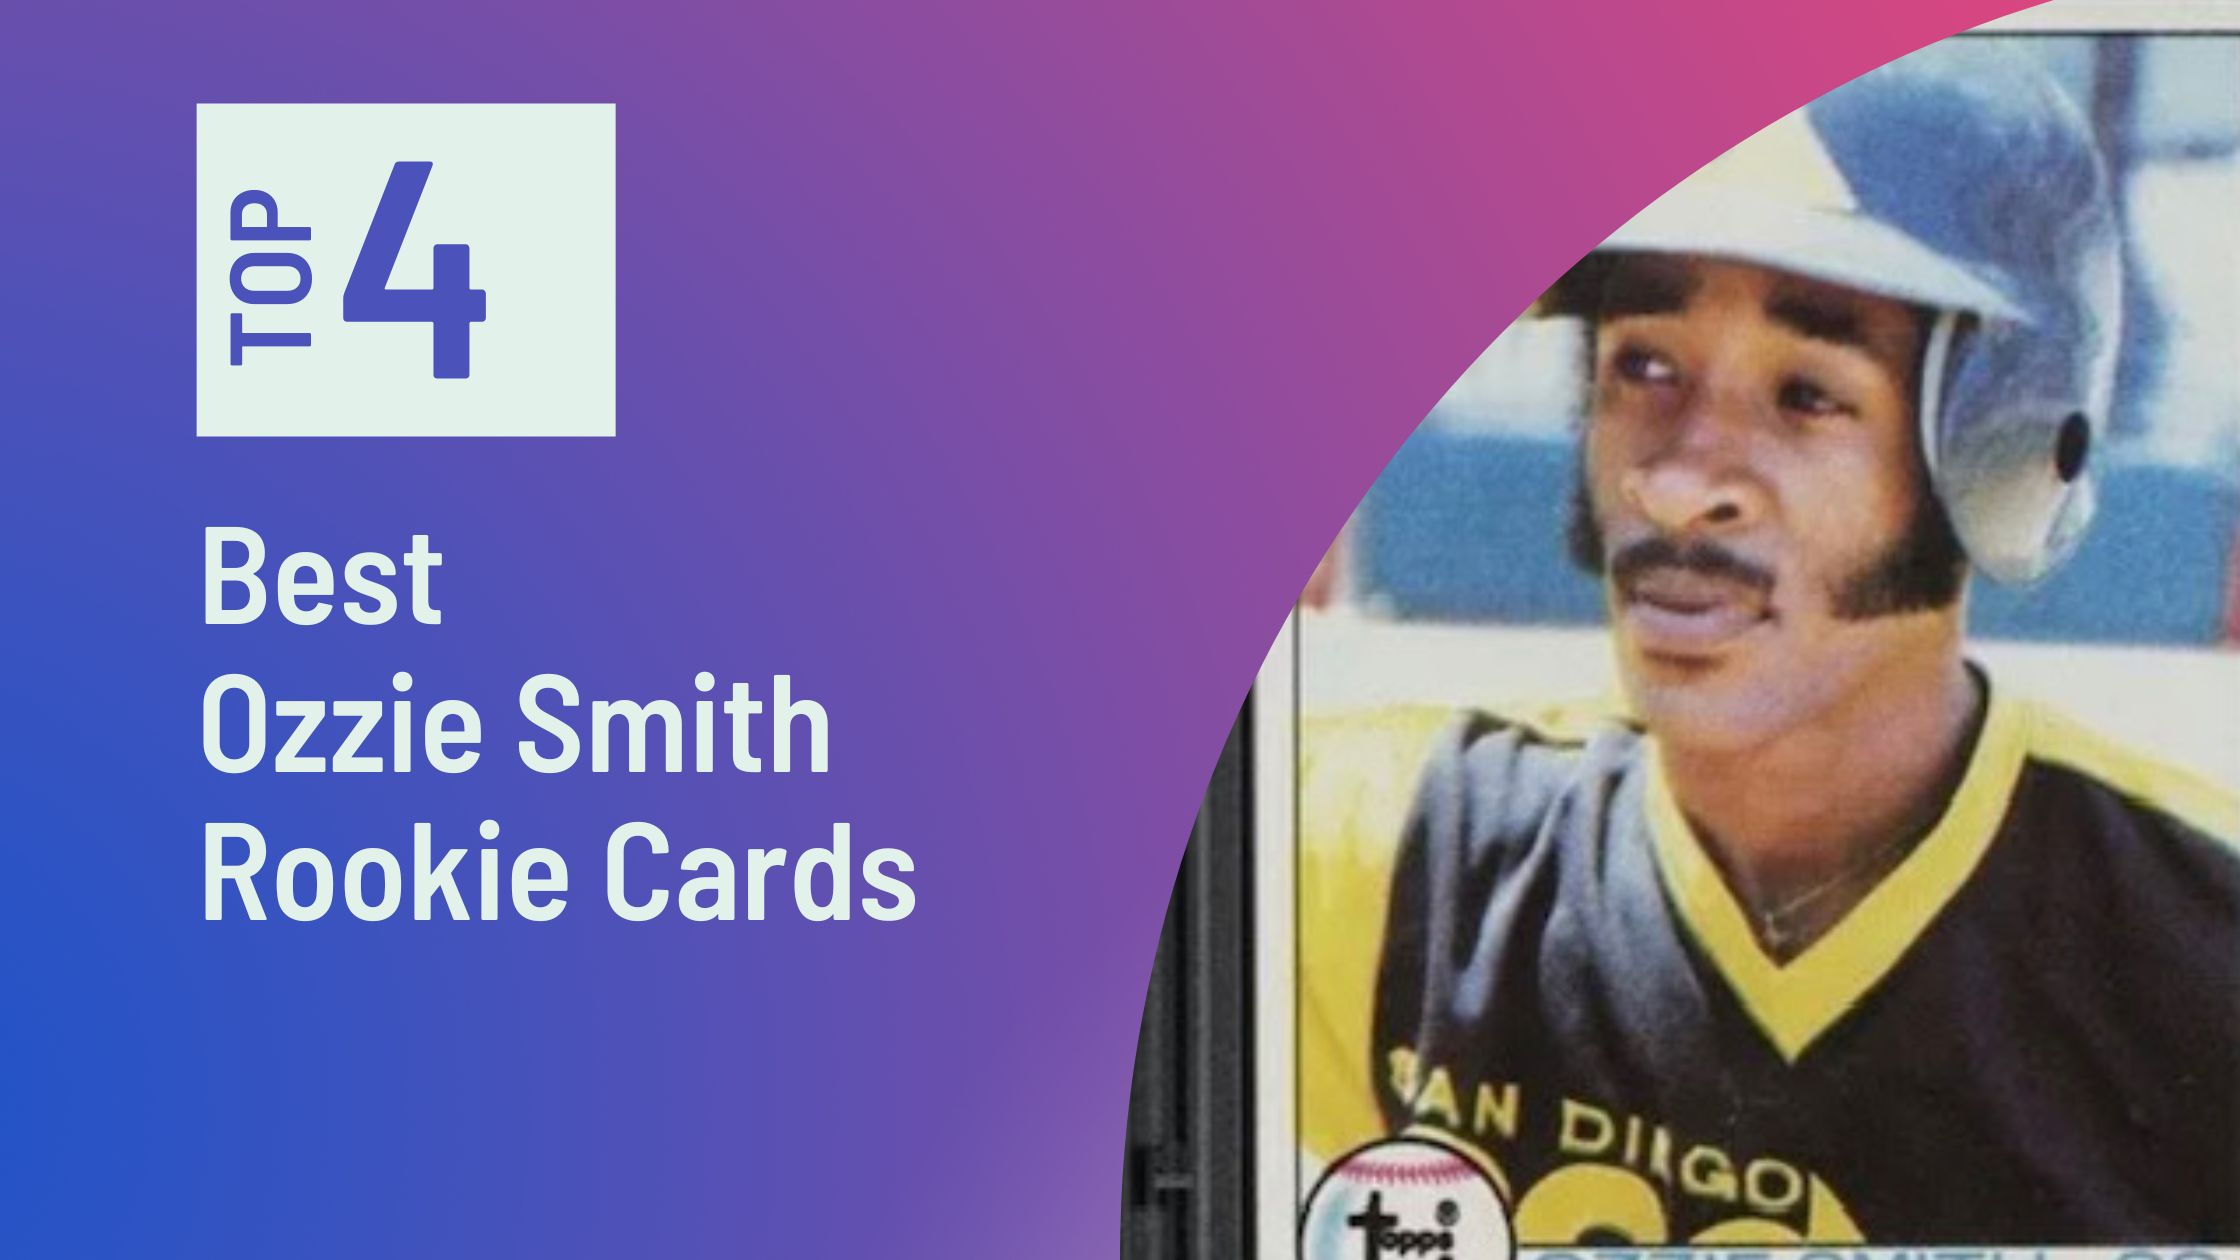 Featured image for the Best Ozzie Smith Rookie Cards blog post on Sports Card Sharks